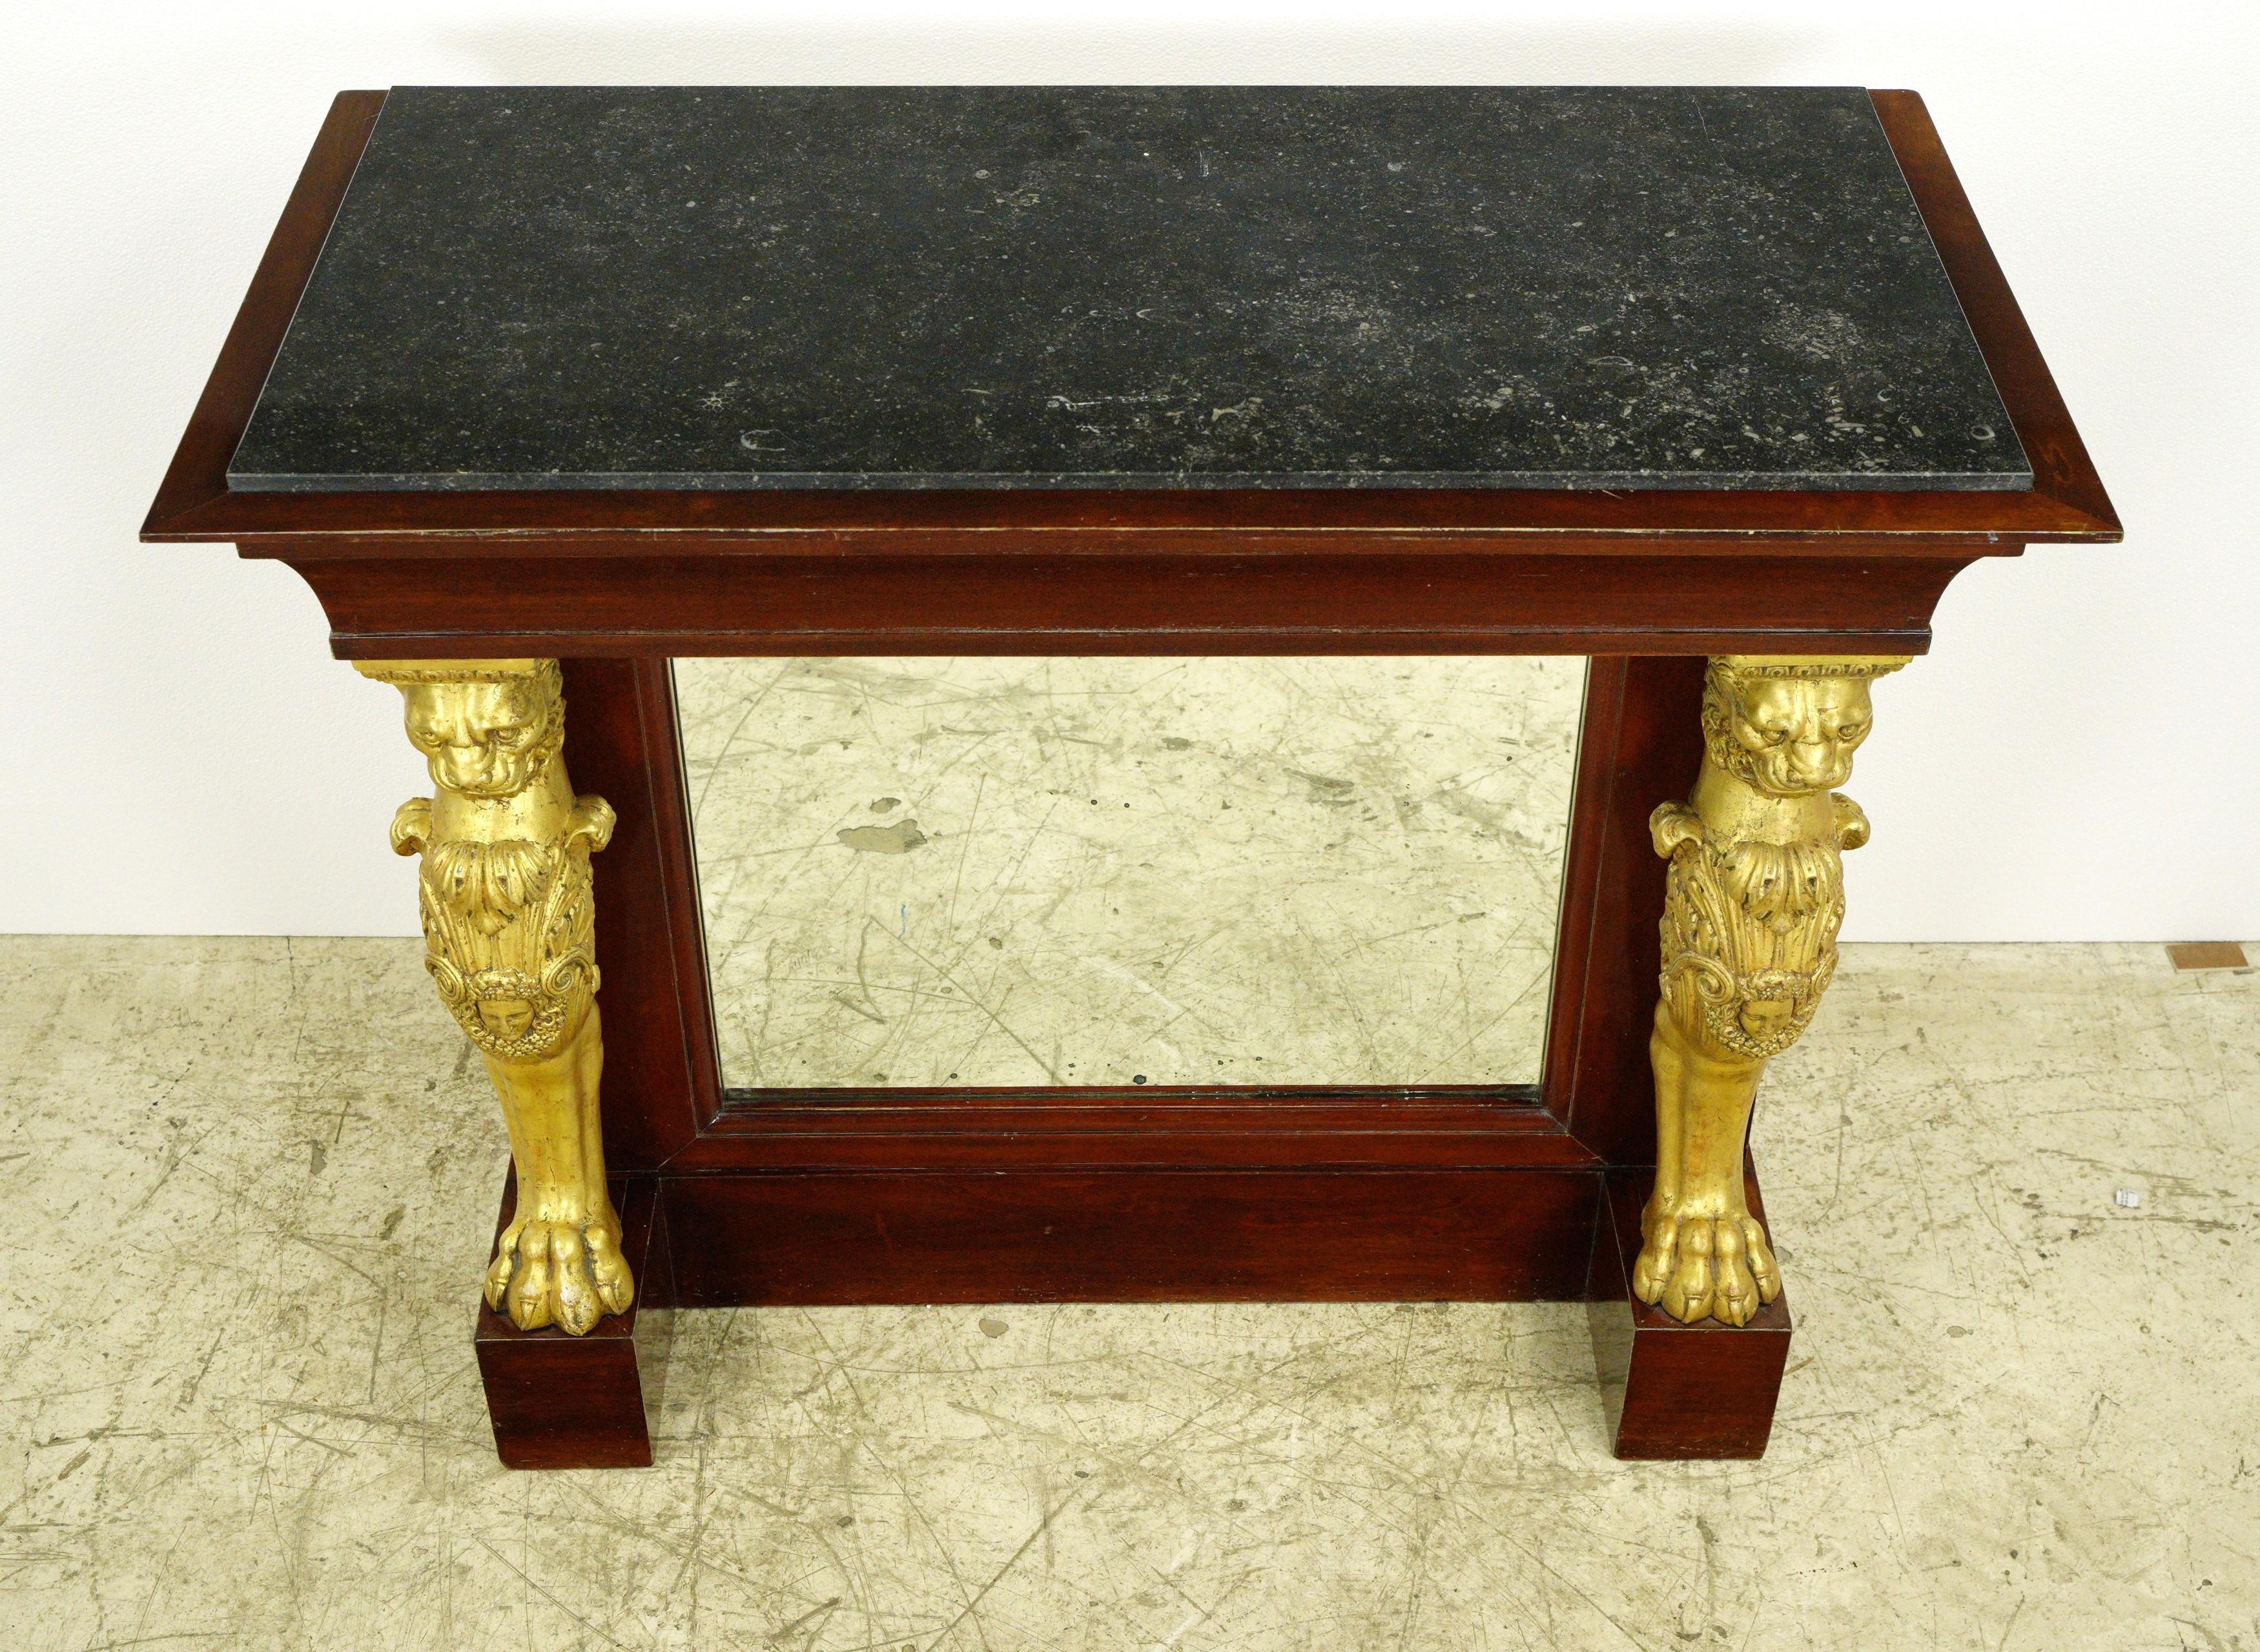 This piece was acquired from an estate located in Greenwich, Connecticut. French Empire mirrored front wood bar with black marble top. It features two drawers and storage shelves on the backside. Two keys are included. Good condition with